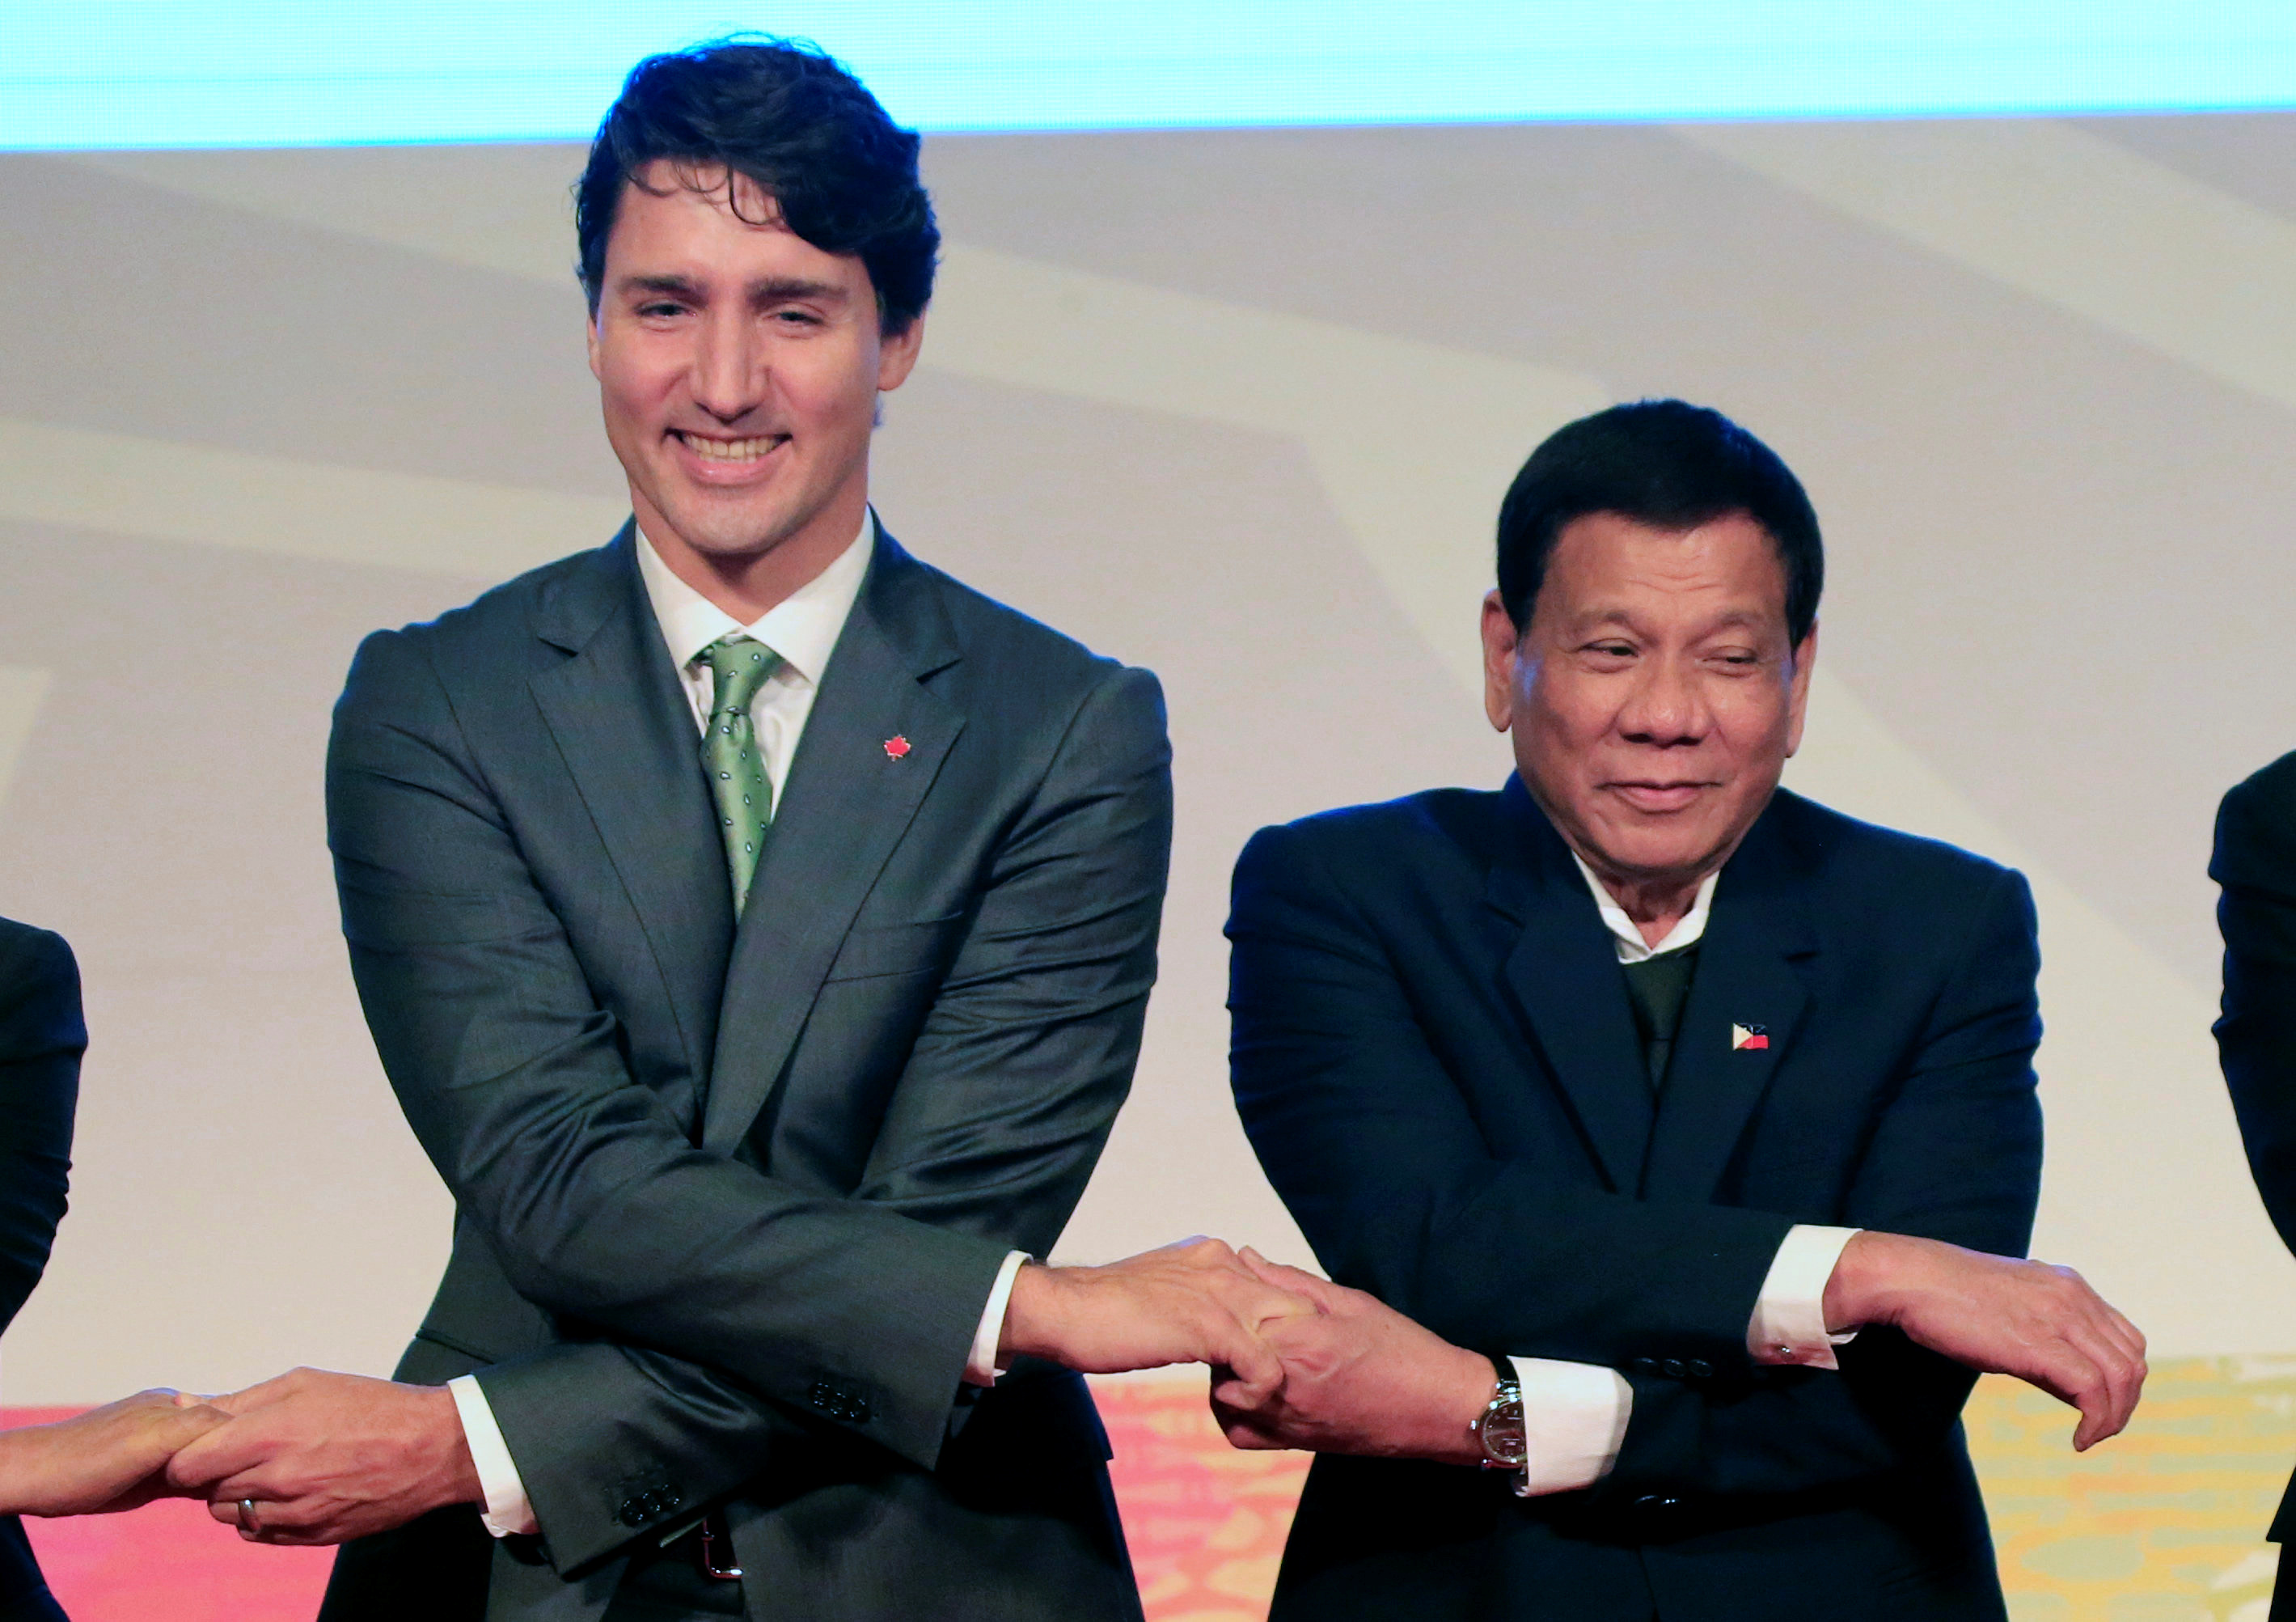 Philippines' President Rodrigo Duterte holds hands with Canada Prime Minister Justin Trudeau for a family photo during the ASEAN-Canada 40th anniversary commerative summit in metro Manila, Philippines November 14, 2017. REUTERS/Romeo Ranoco